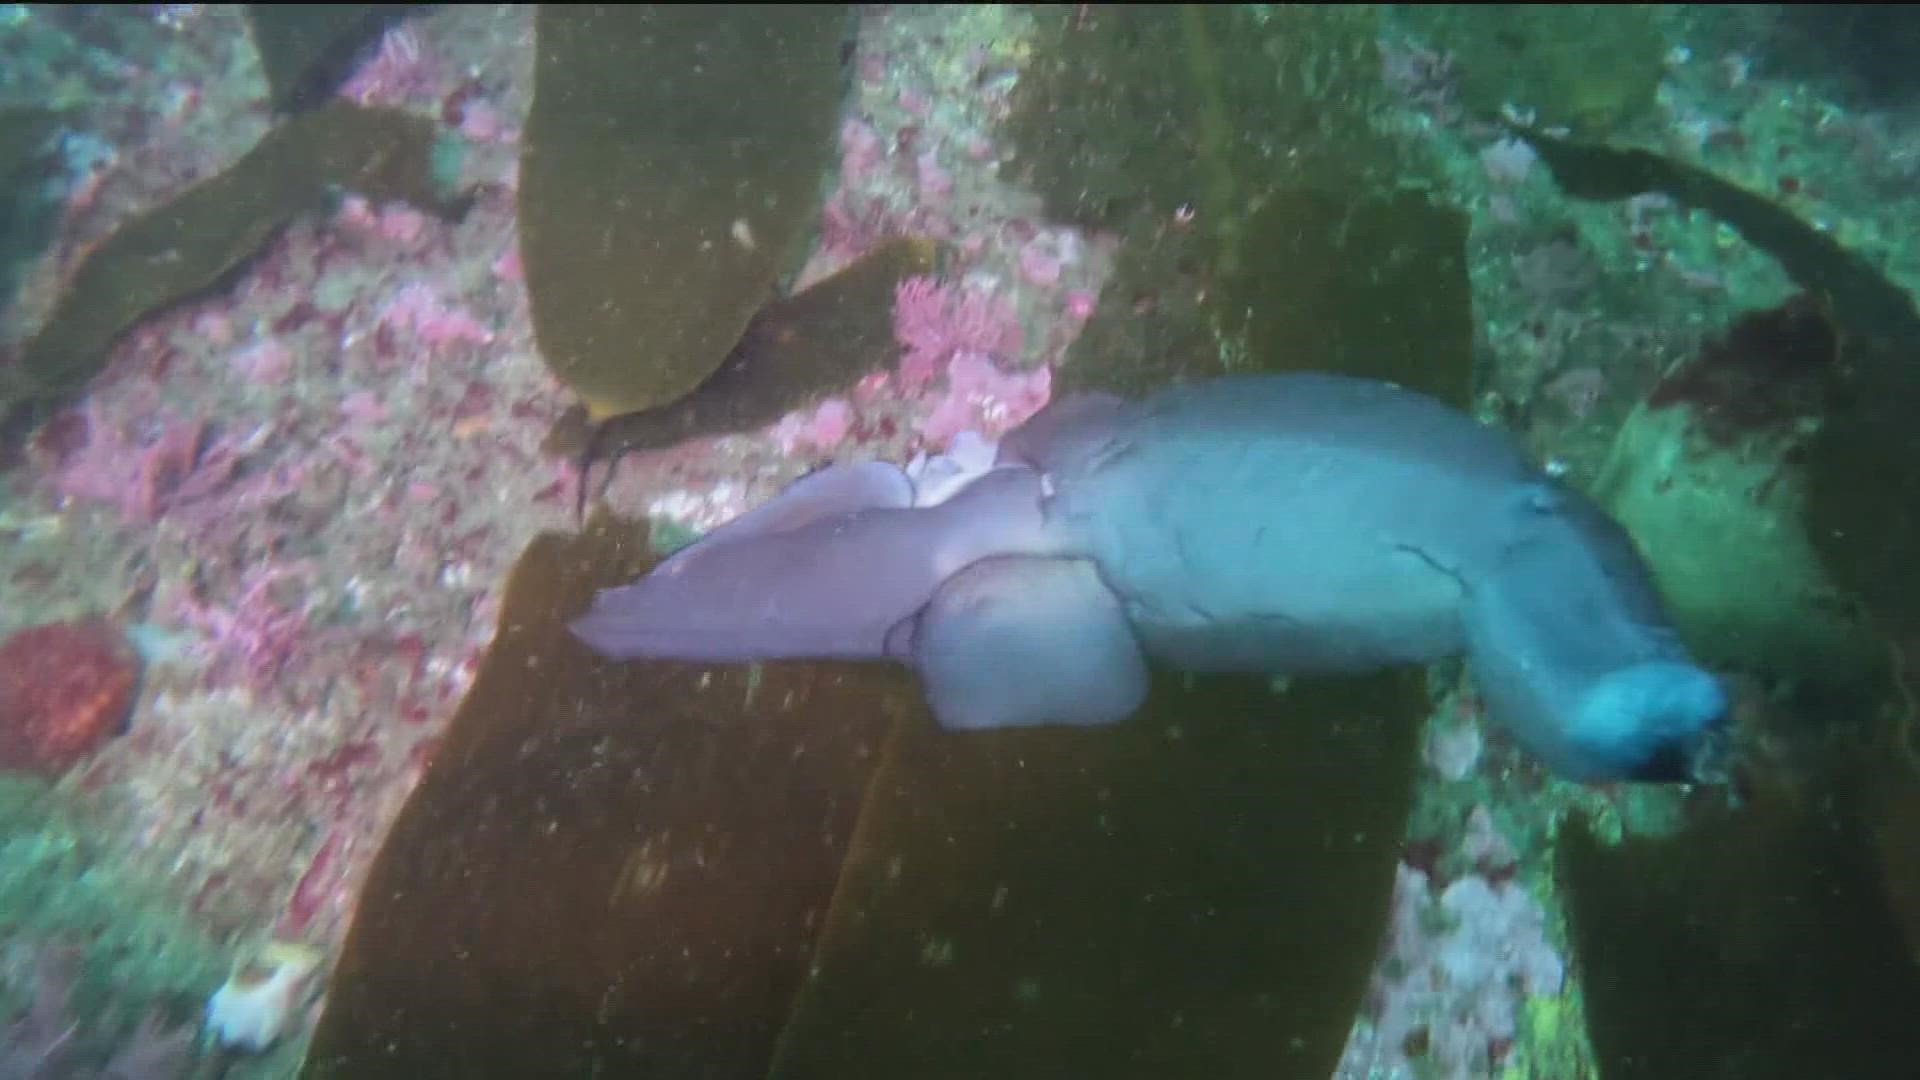 Marc Hale was with a dive group on Saturday off Point Loma at 65-feet when he spotted the creature.